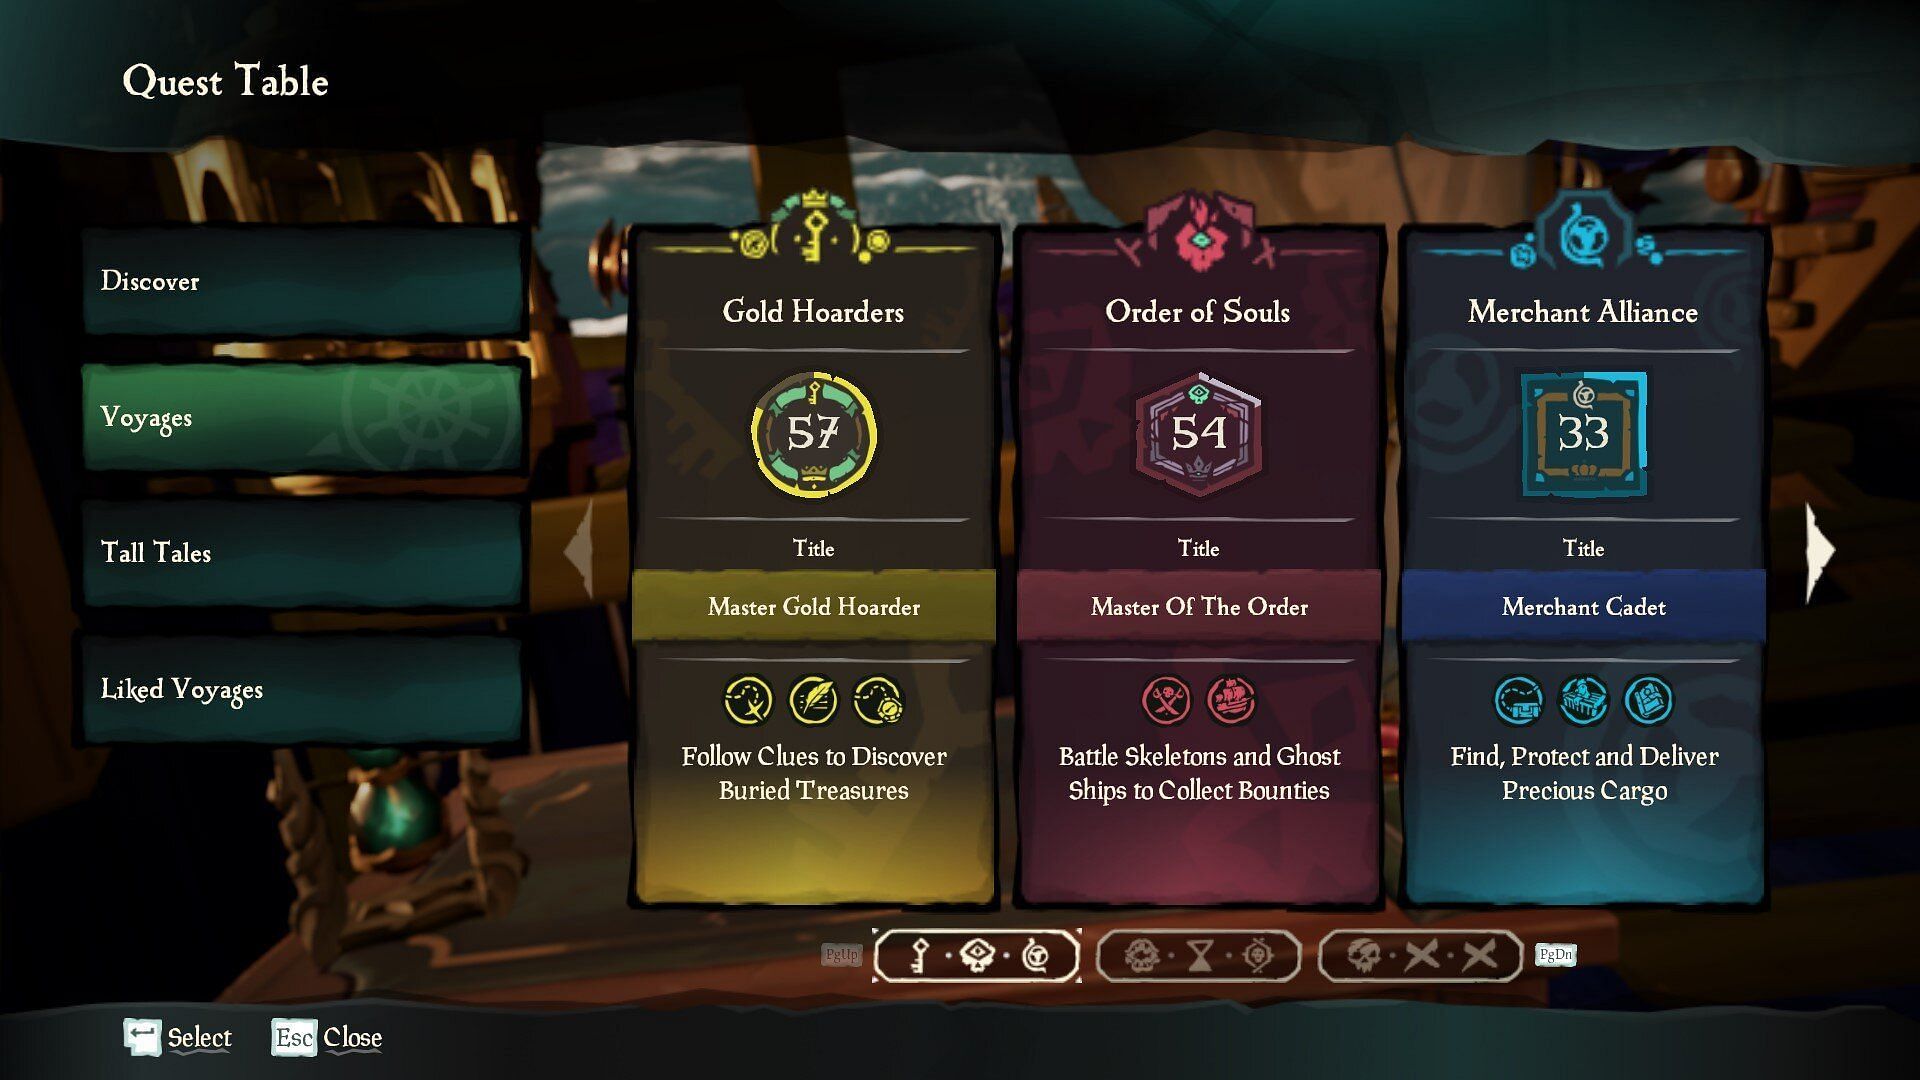 Voyages tab lets players undertake quests under various Trading Companies. (Image via Rare)